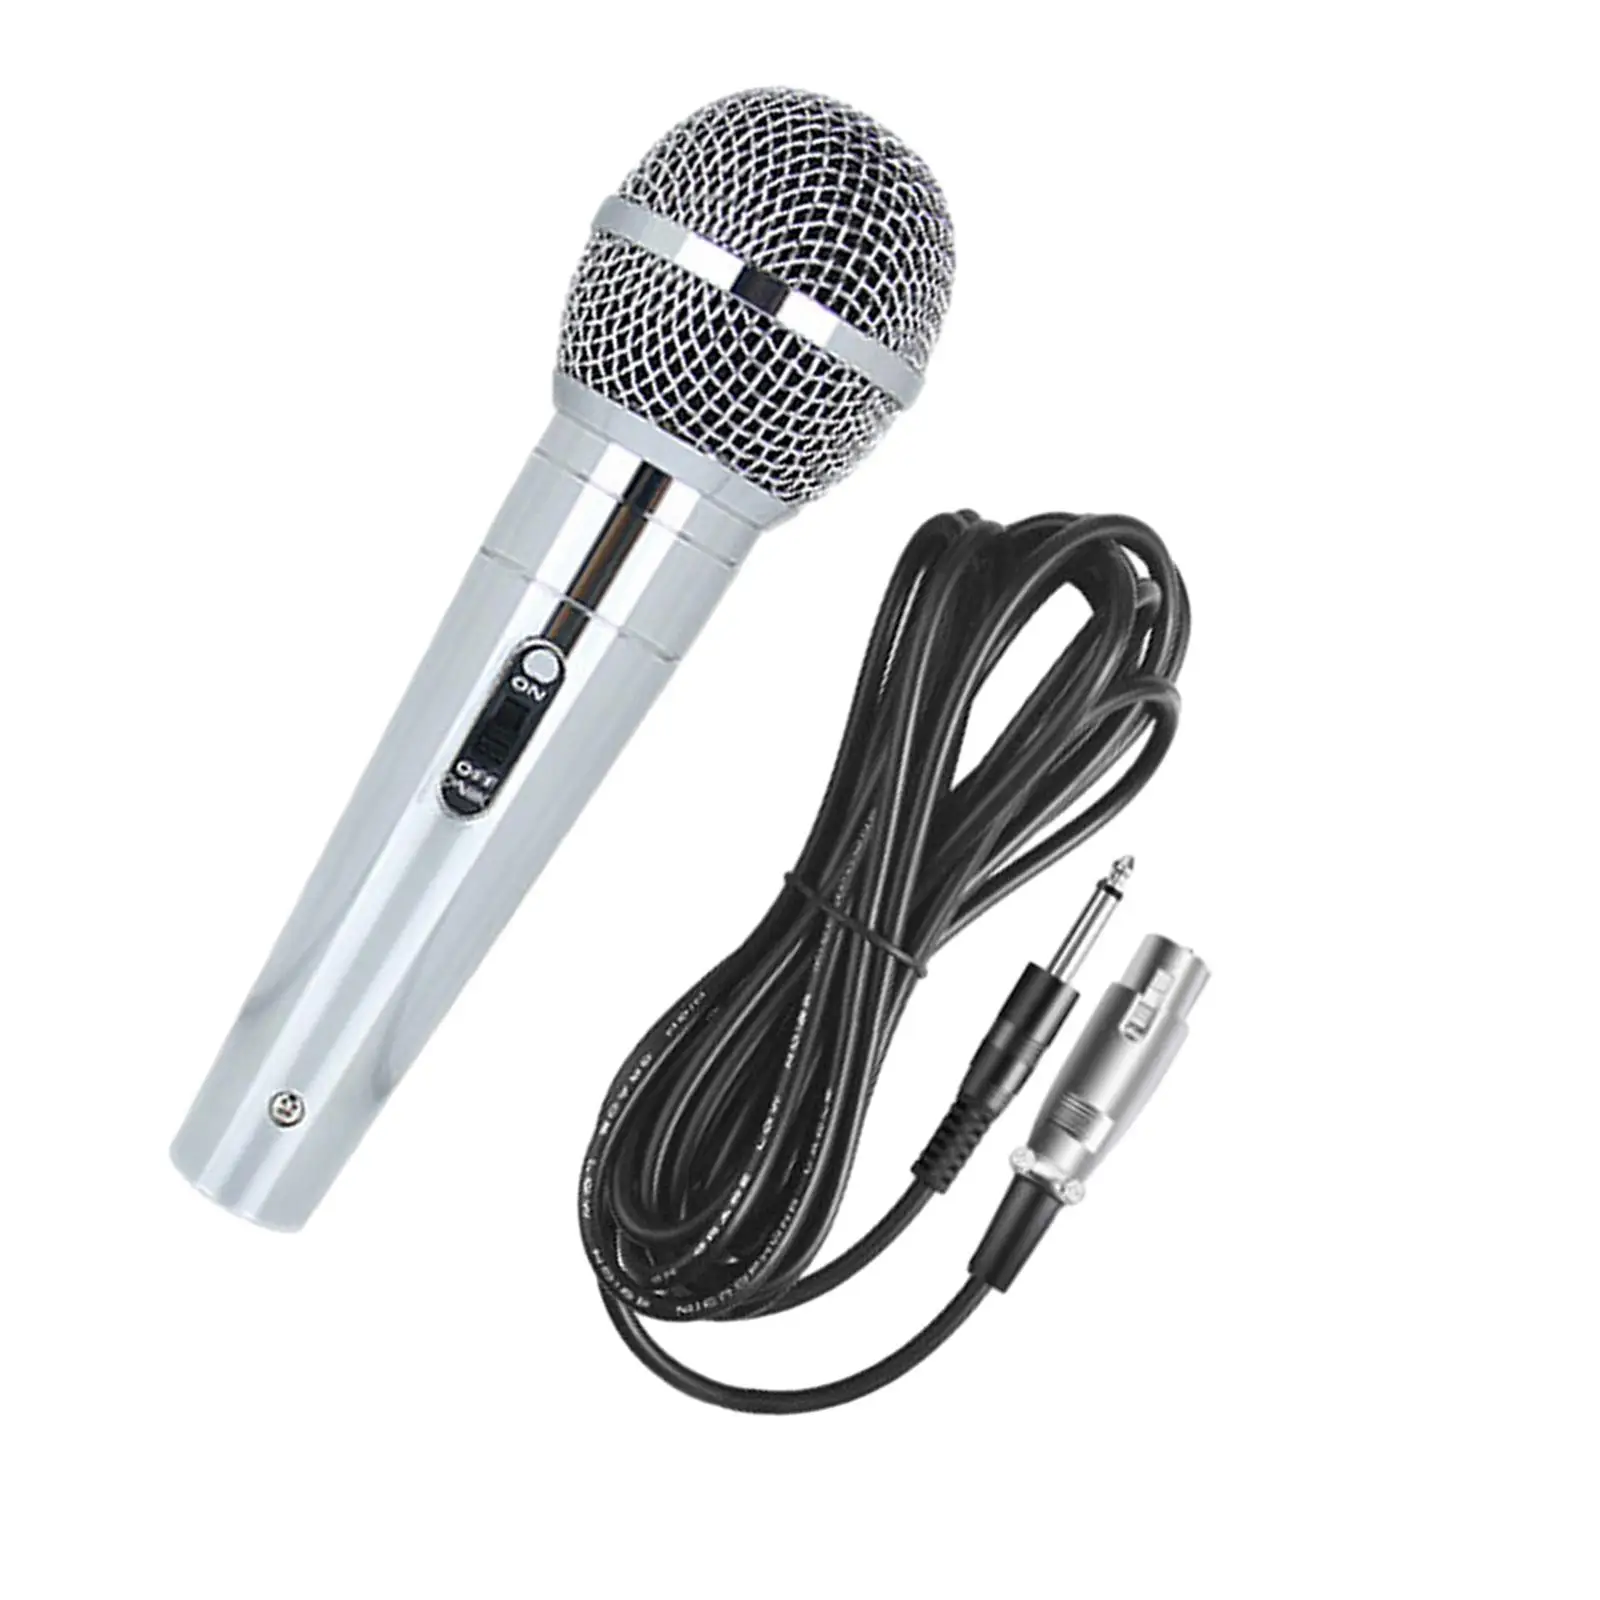 Karaoke Microphone High Performance Dynamic Vocal Microphone Wired Microphone for Singing Meeting Mixer Speech Show